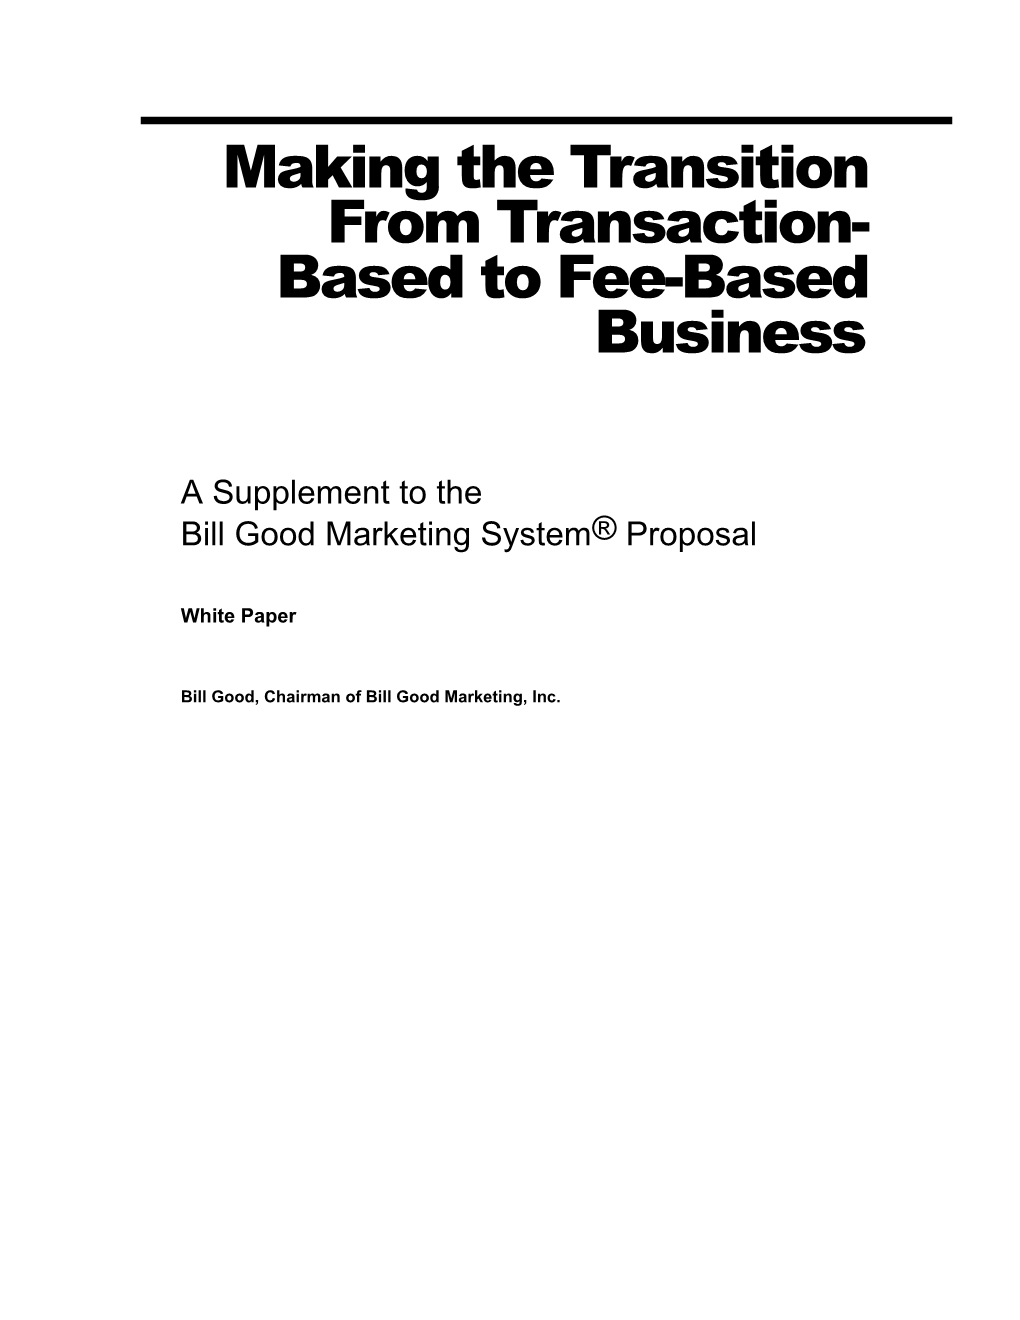 Making the Transition from Transaction-Based to Fee-Based Business